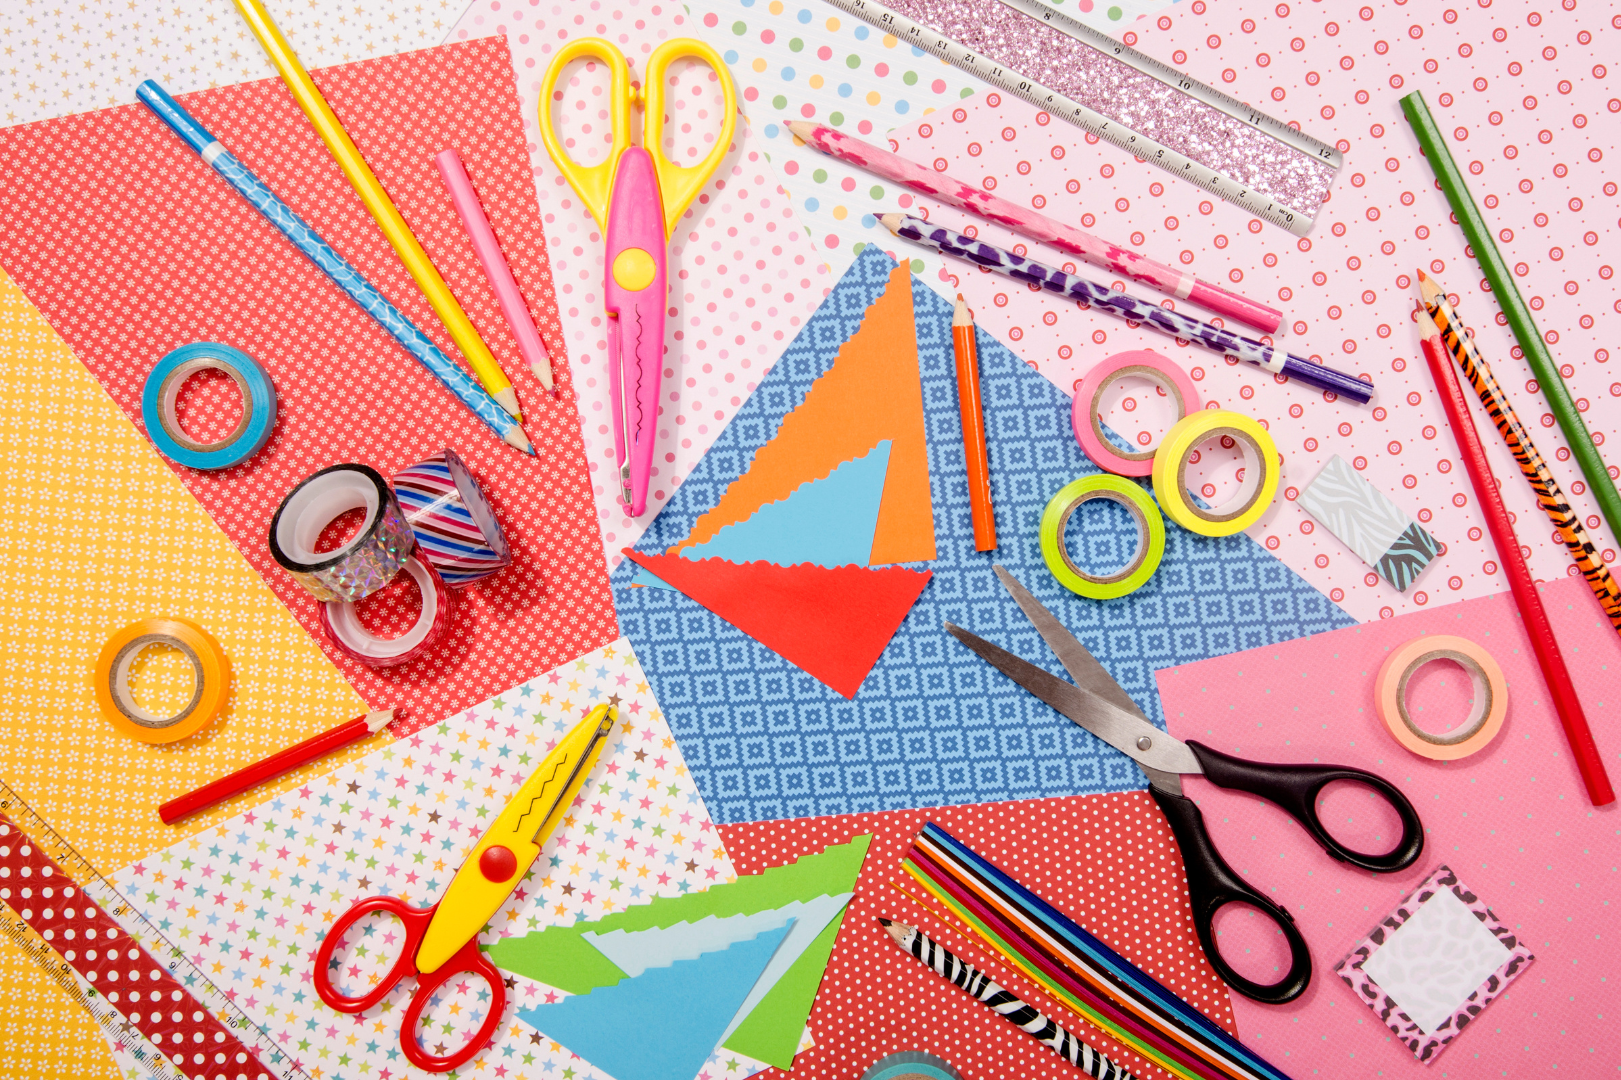 photo depicts scissors, paper, and washi tape